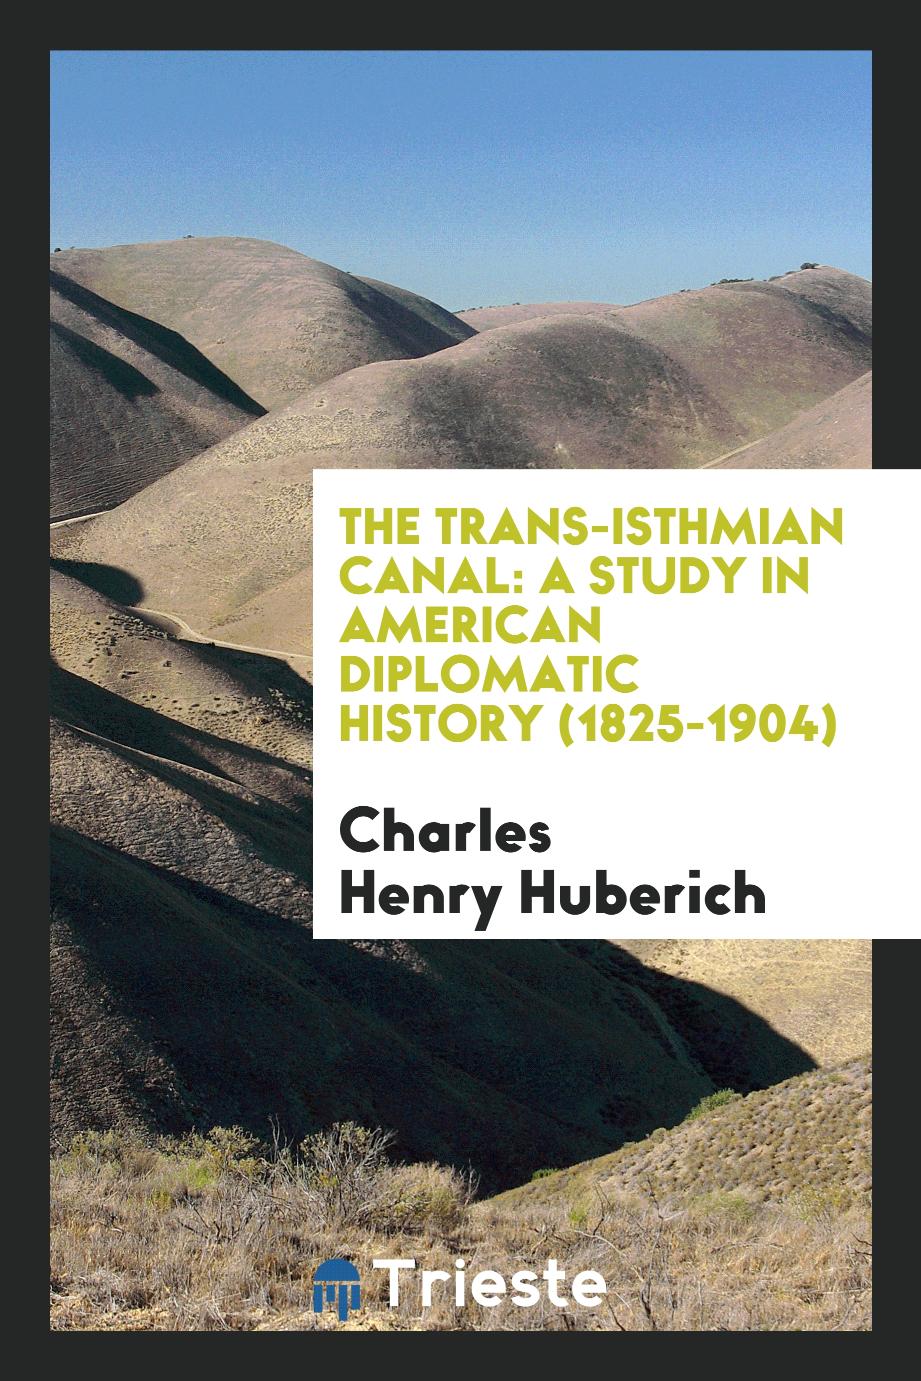 The Trans-Isthmian canal: a study in American diplomatic history (1825-1904)